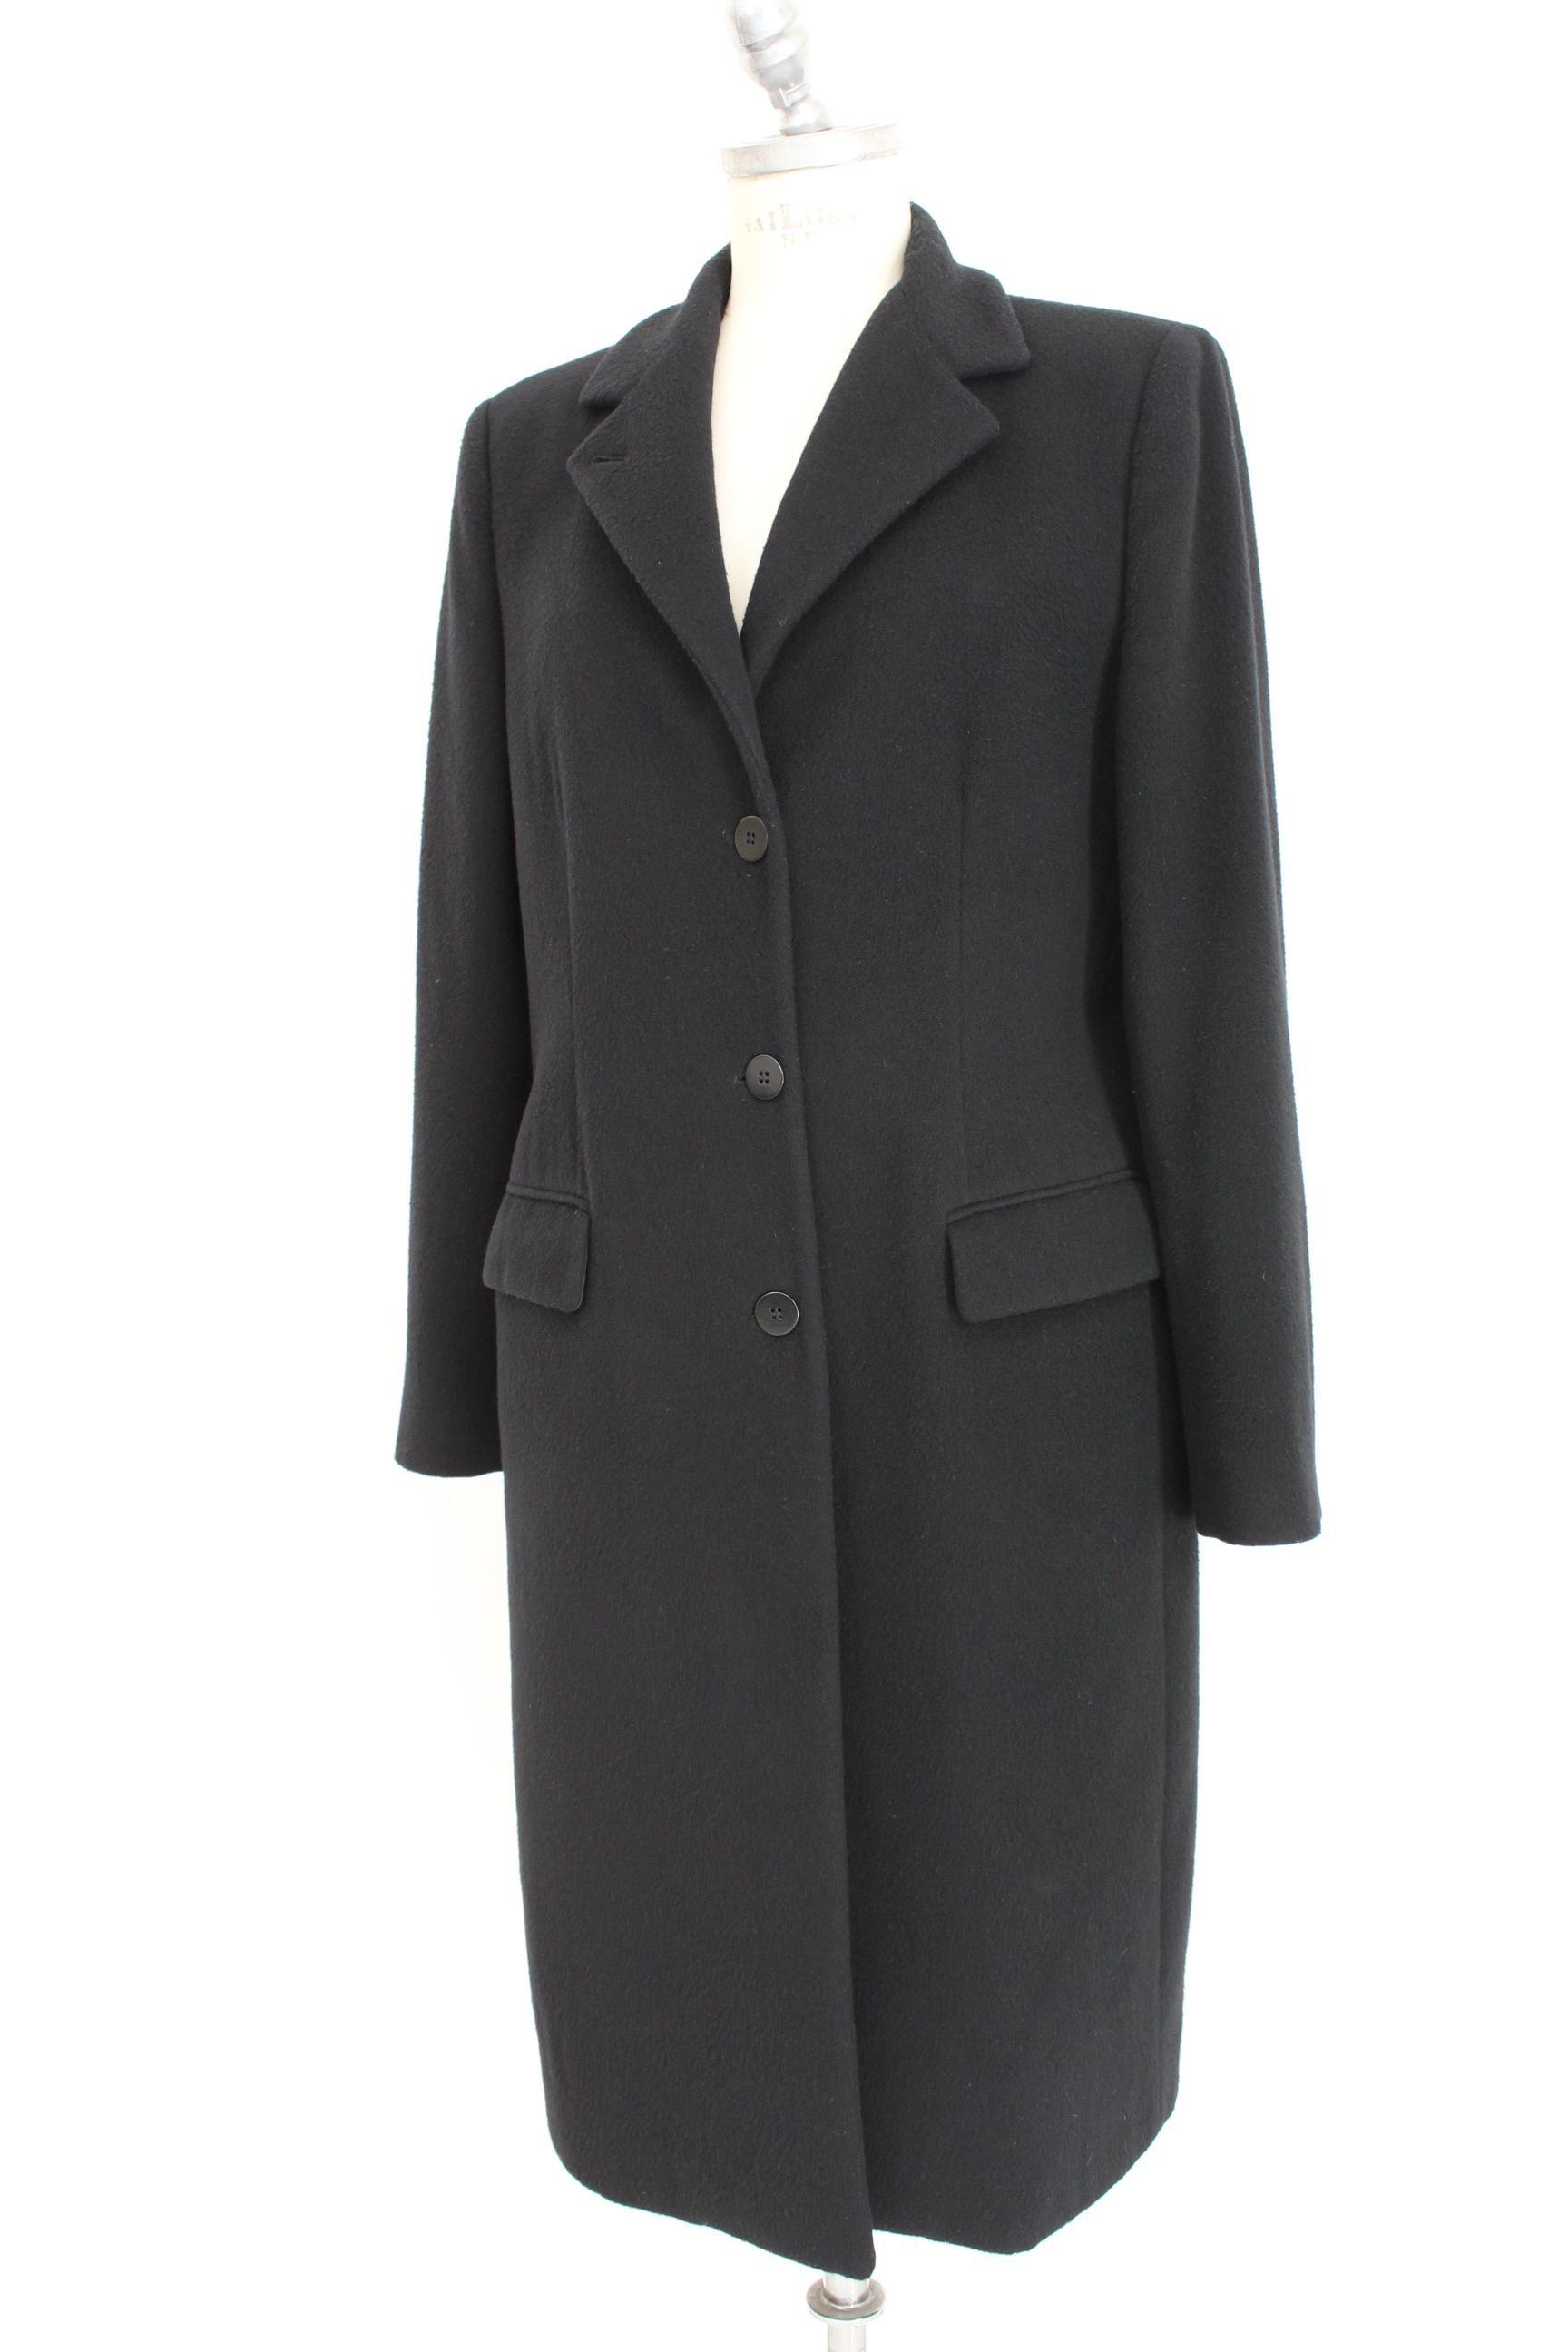 Armani Collezioni Black Soft Wool Classic Long High Collar Elegant Coat  In Excellent Condition In Brindisi, Bt